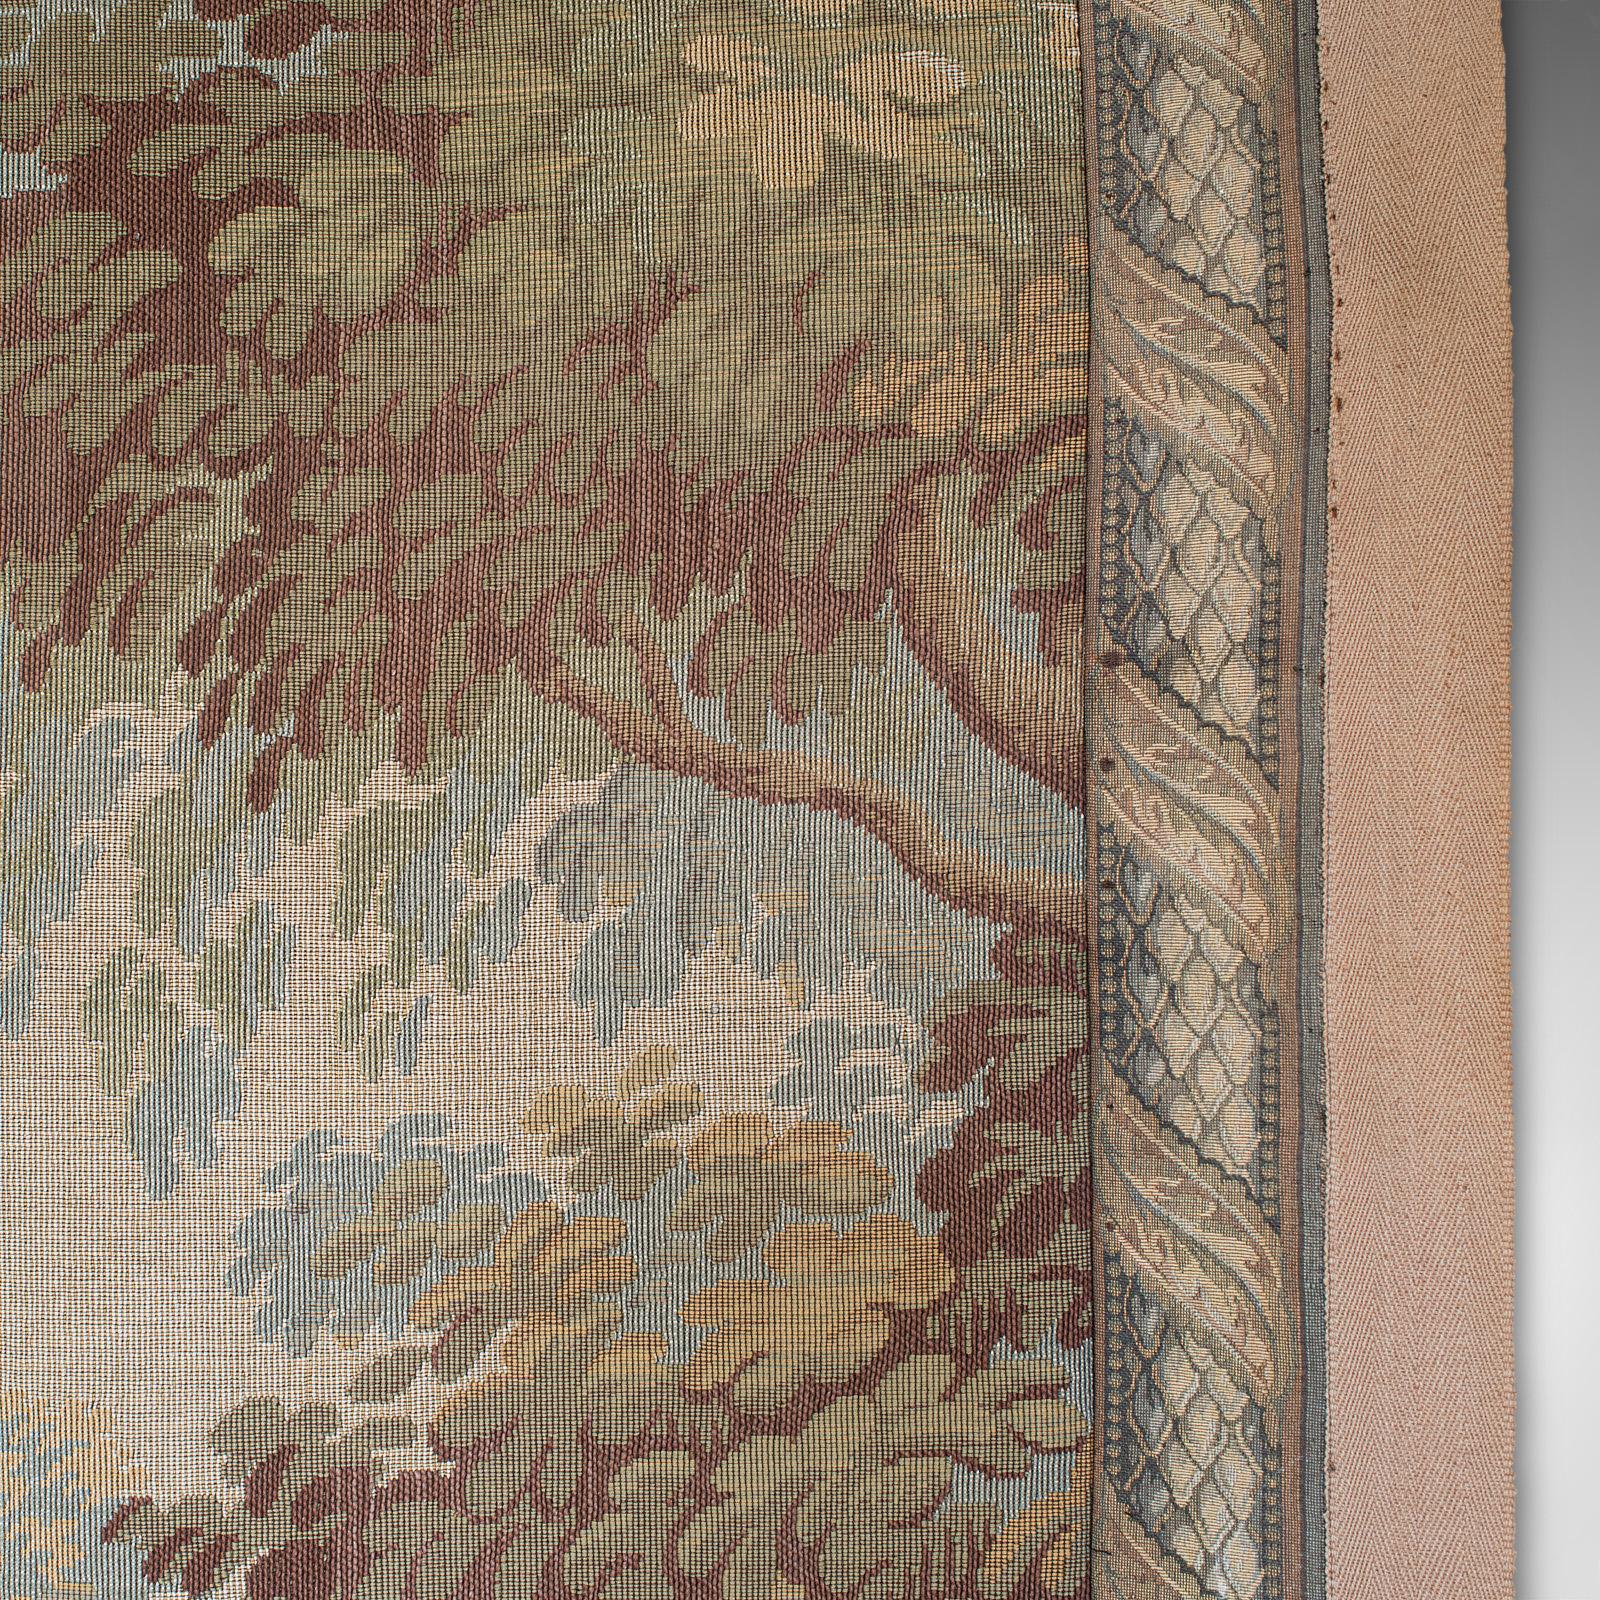 Hand-Crafted vAntique Verdure Tapestry, Continental, Textile, Wall, Decorative, Victorian